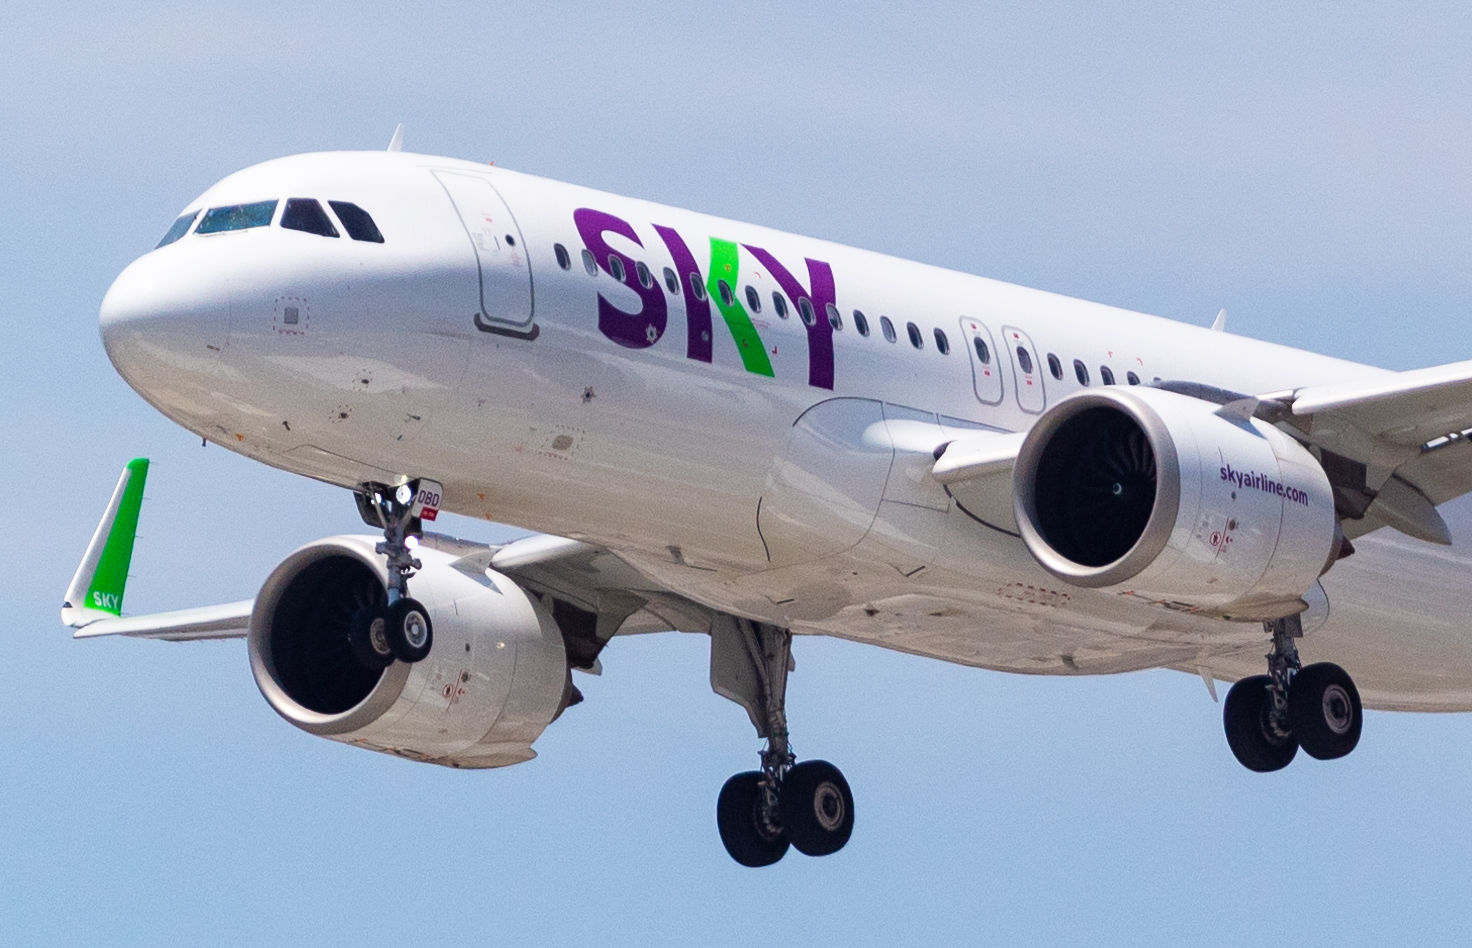 CC-DBD - Airbus A320 NEO - Sky Airlines - Blog do Spotter